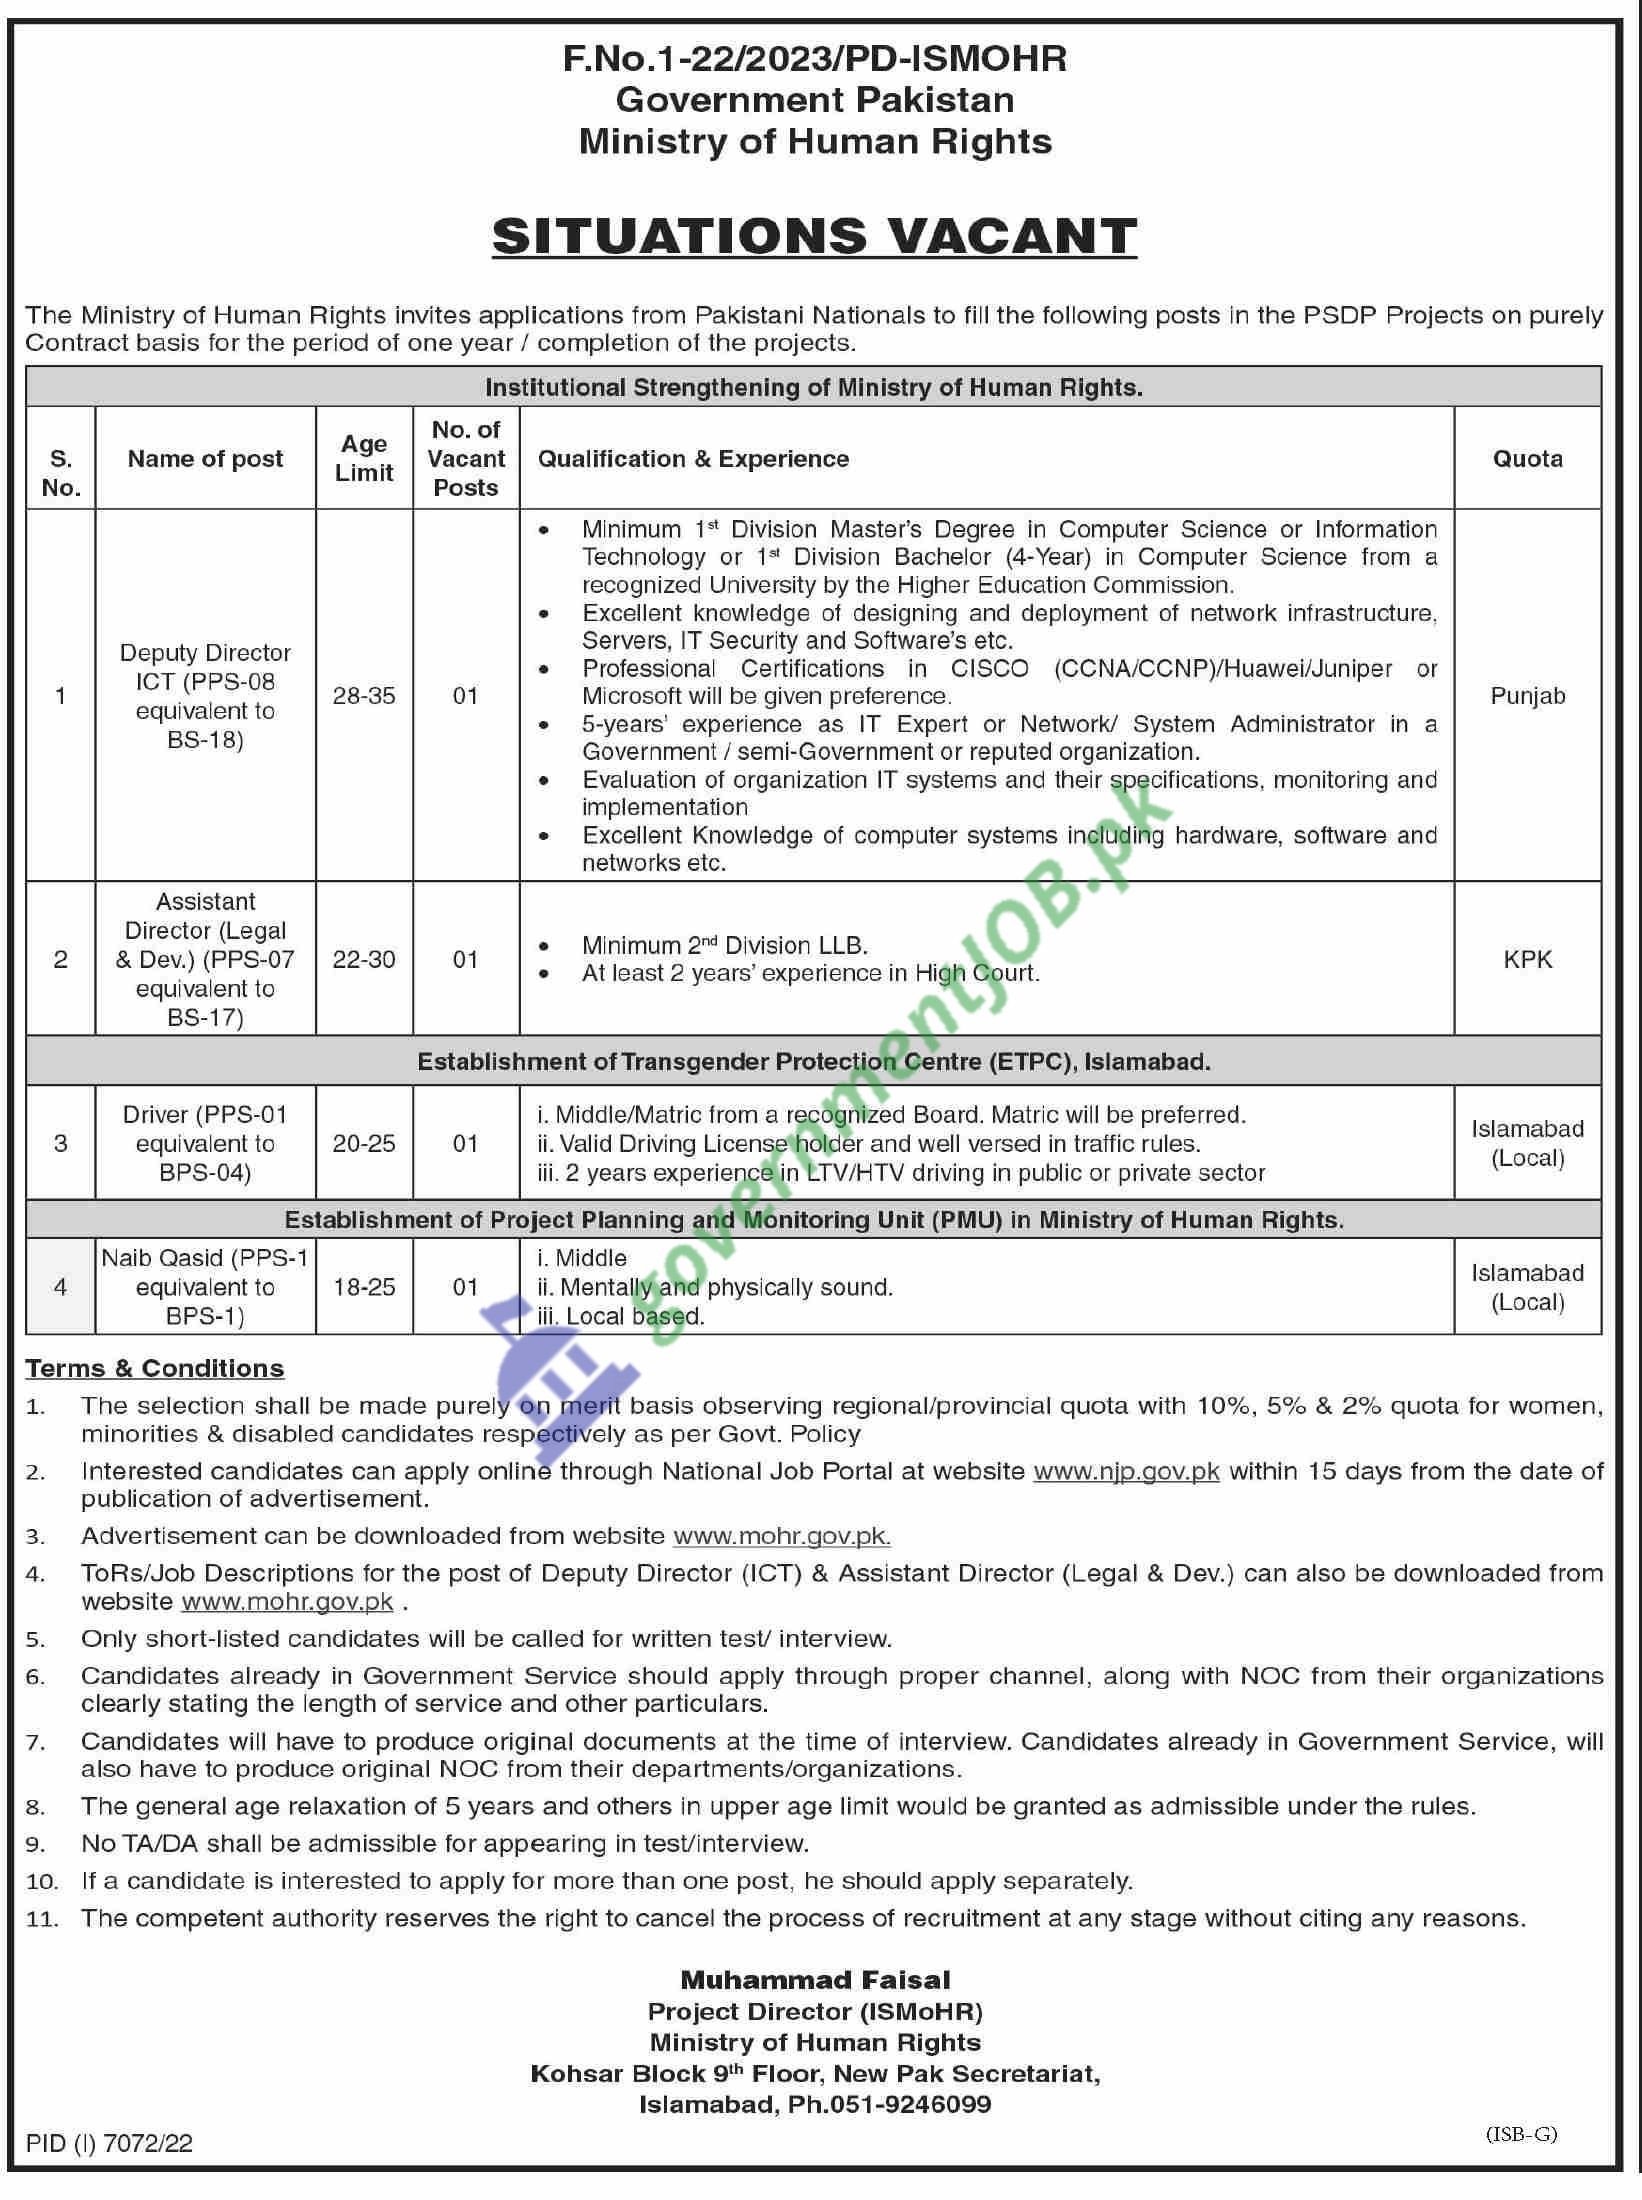 Ministry of Human Rights Jobs ad 2023